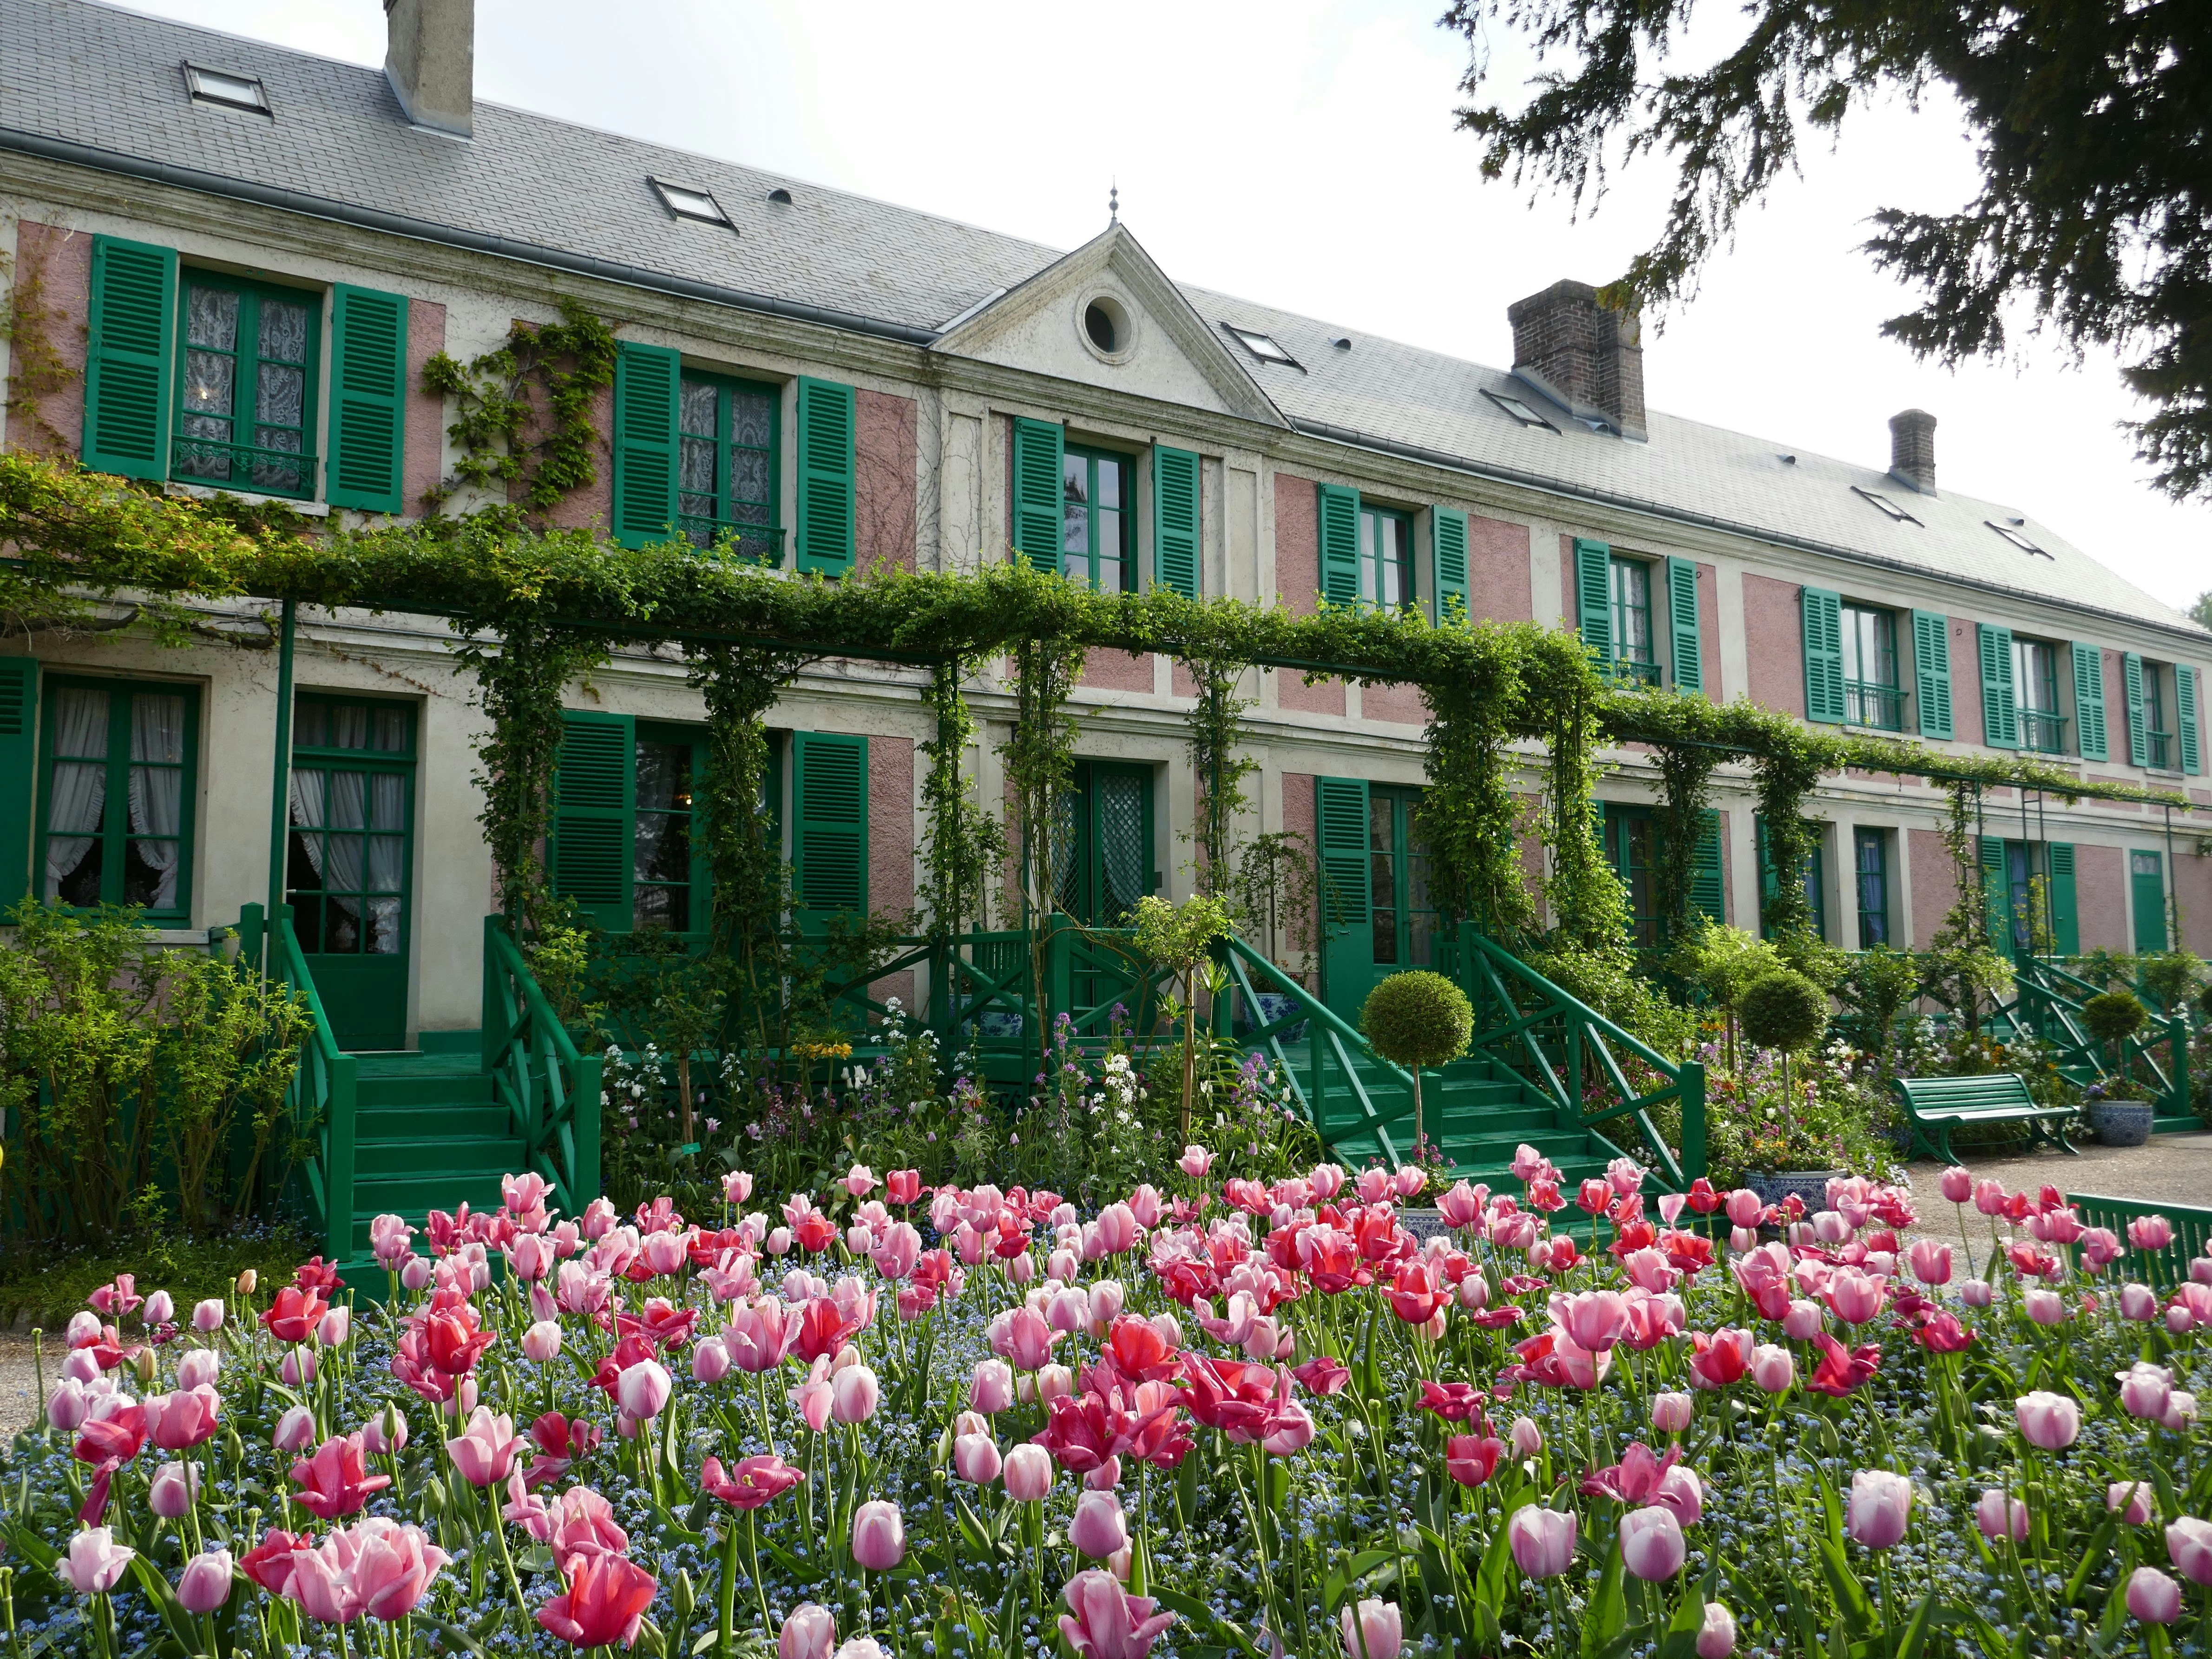 The Maison et Jardin de Claude Monet; the large house is painted pink and has with green shutters. A mass of pink flowers are in bloom outside the house.